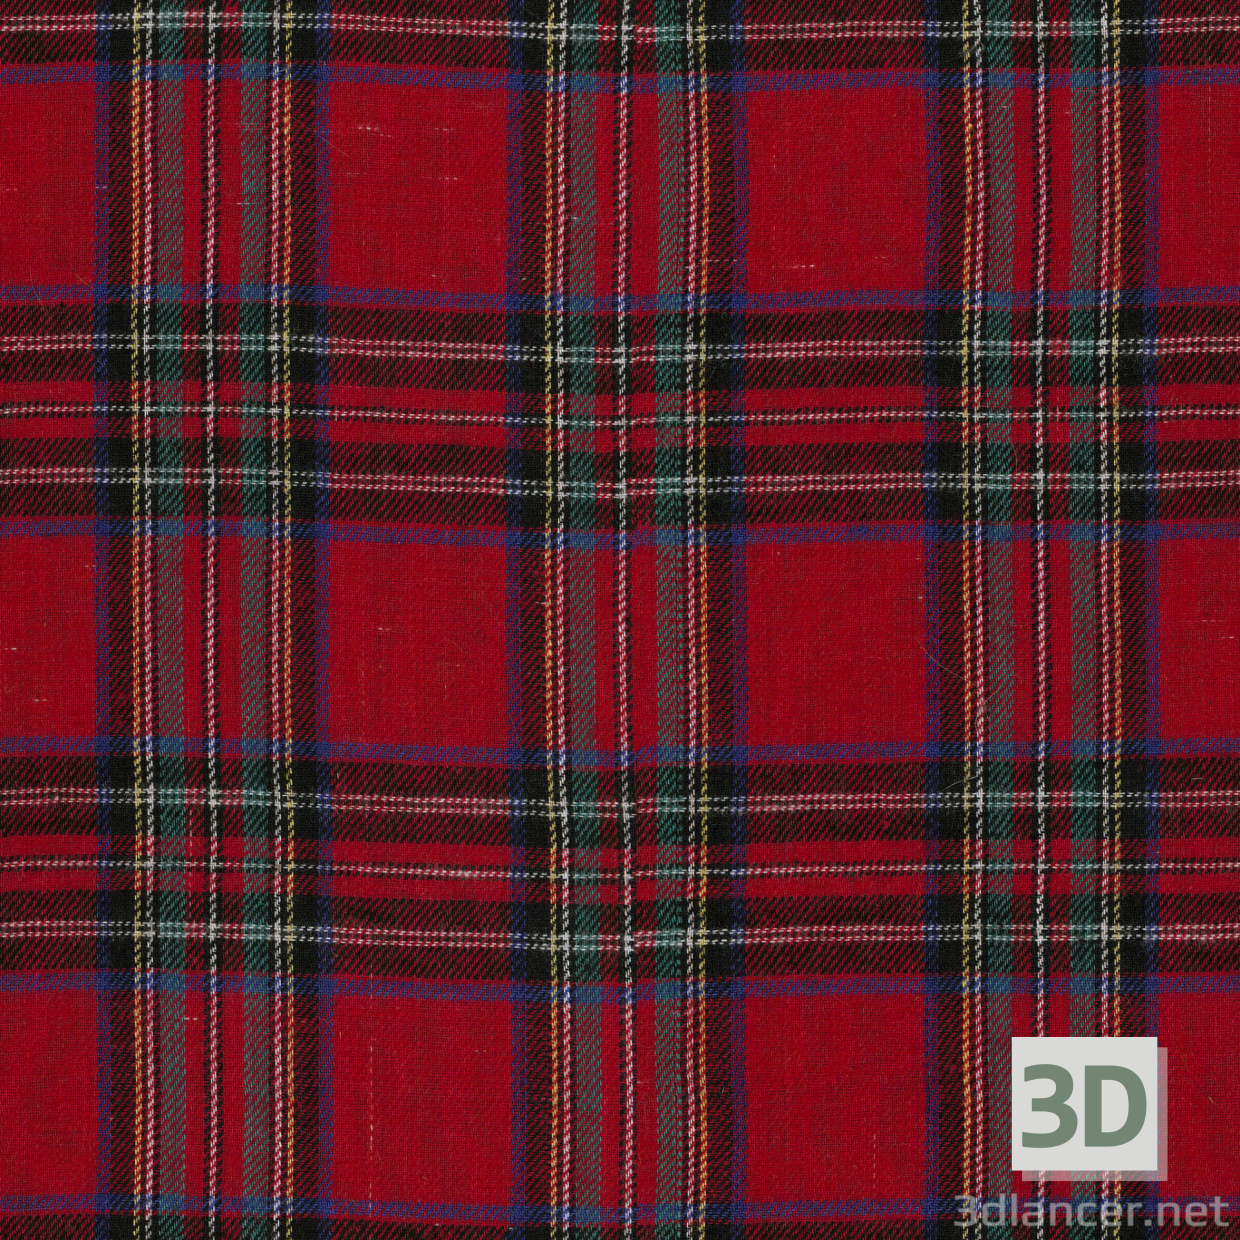 Texture plaid 04 free download - image